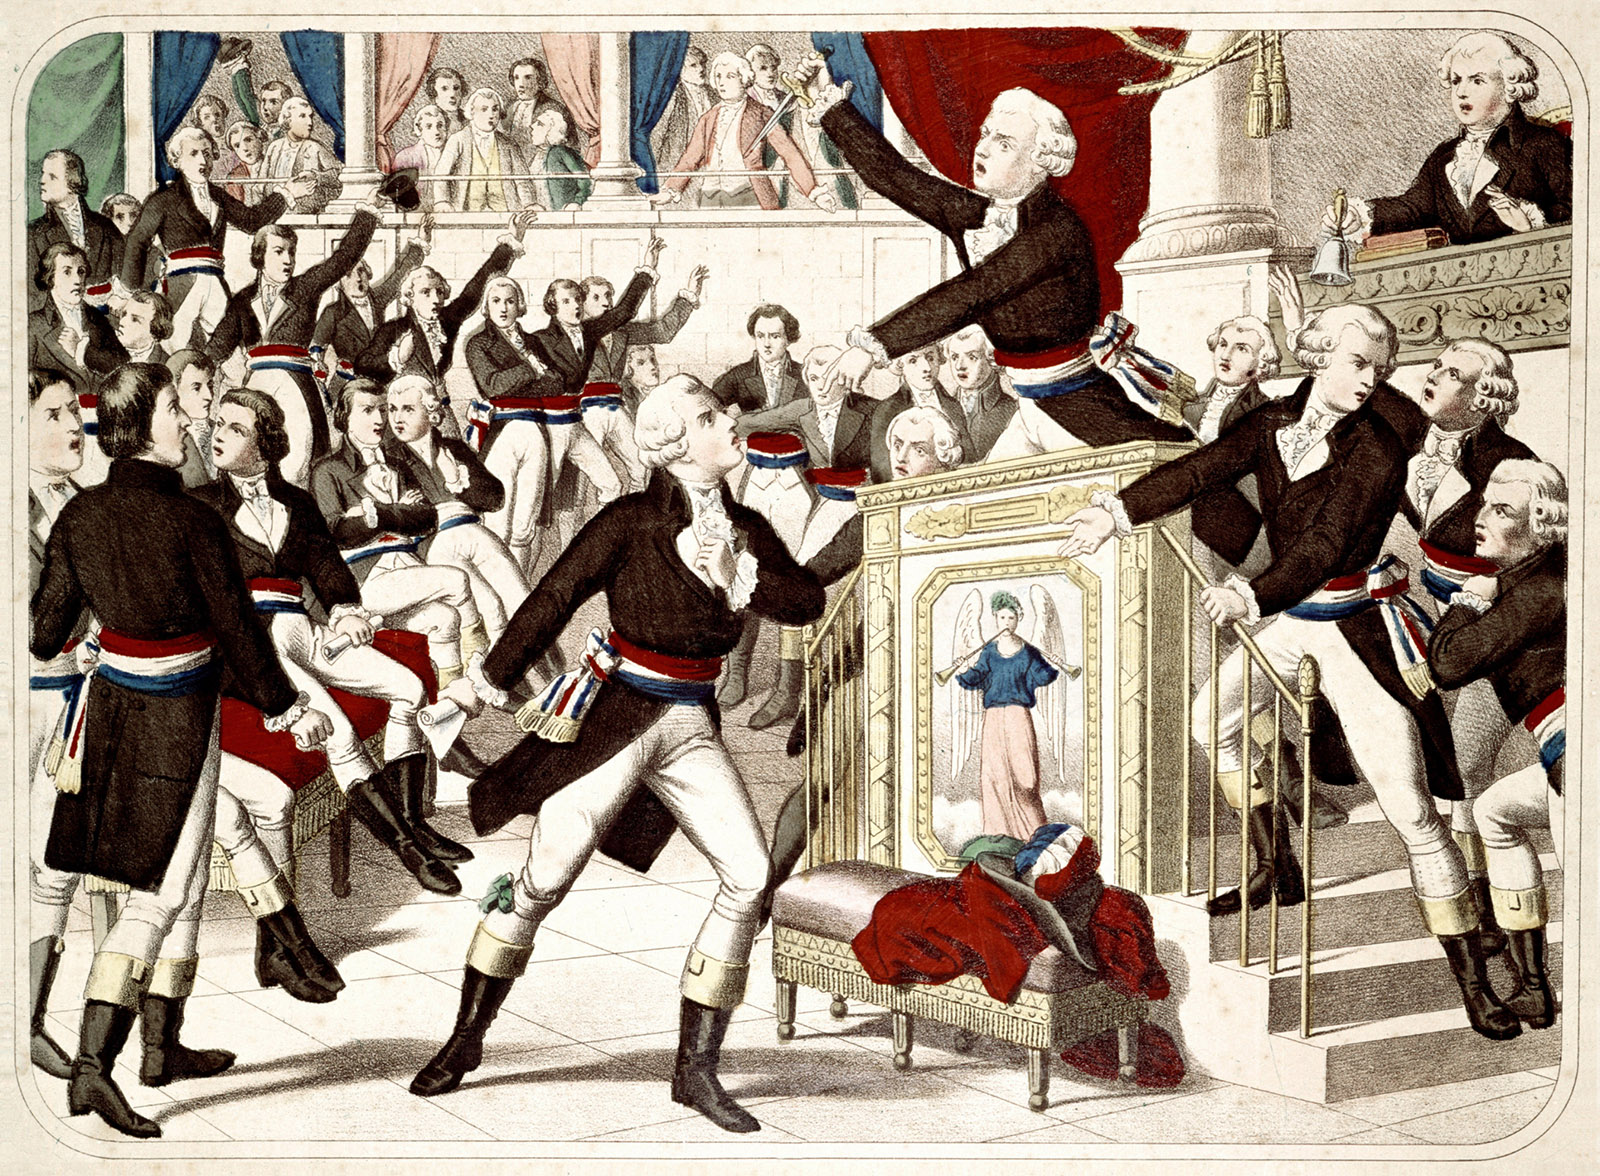 Engraving of Jean-Lambert Tallien threatening to kill Maximilien Robespierre at a meeting of the National Convention, Paris, 1794